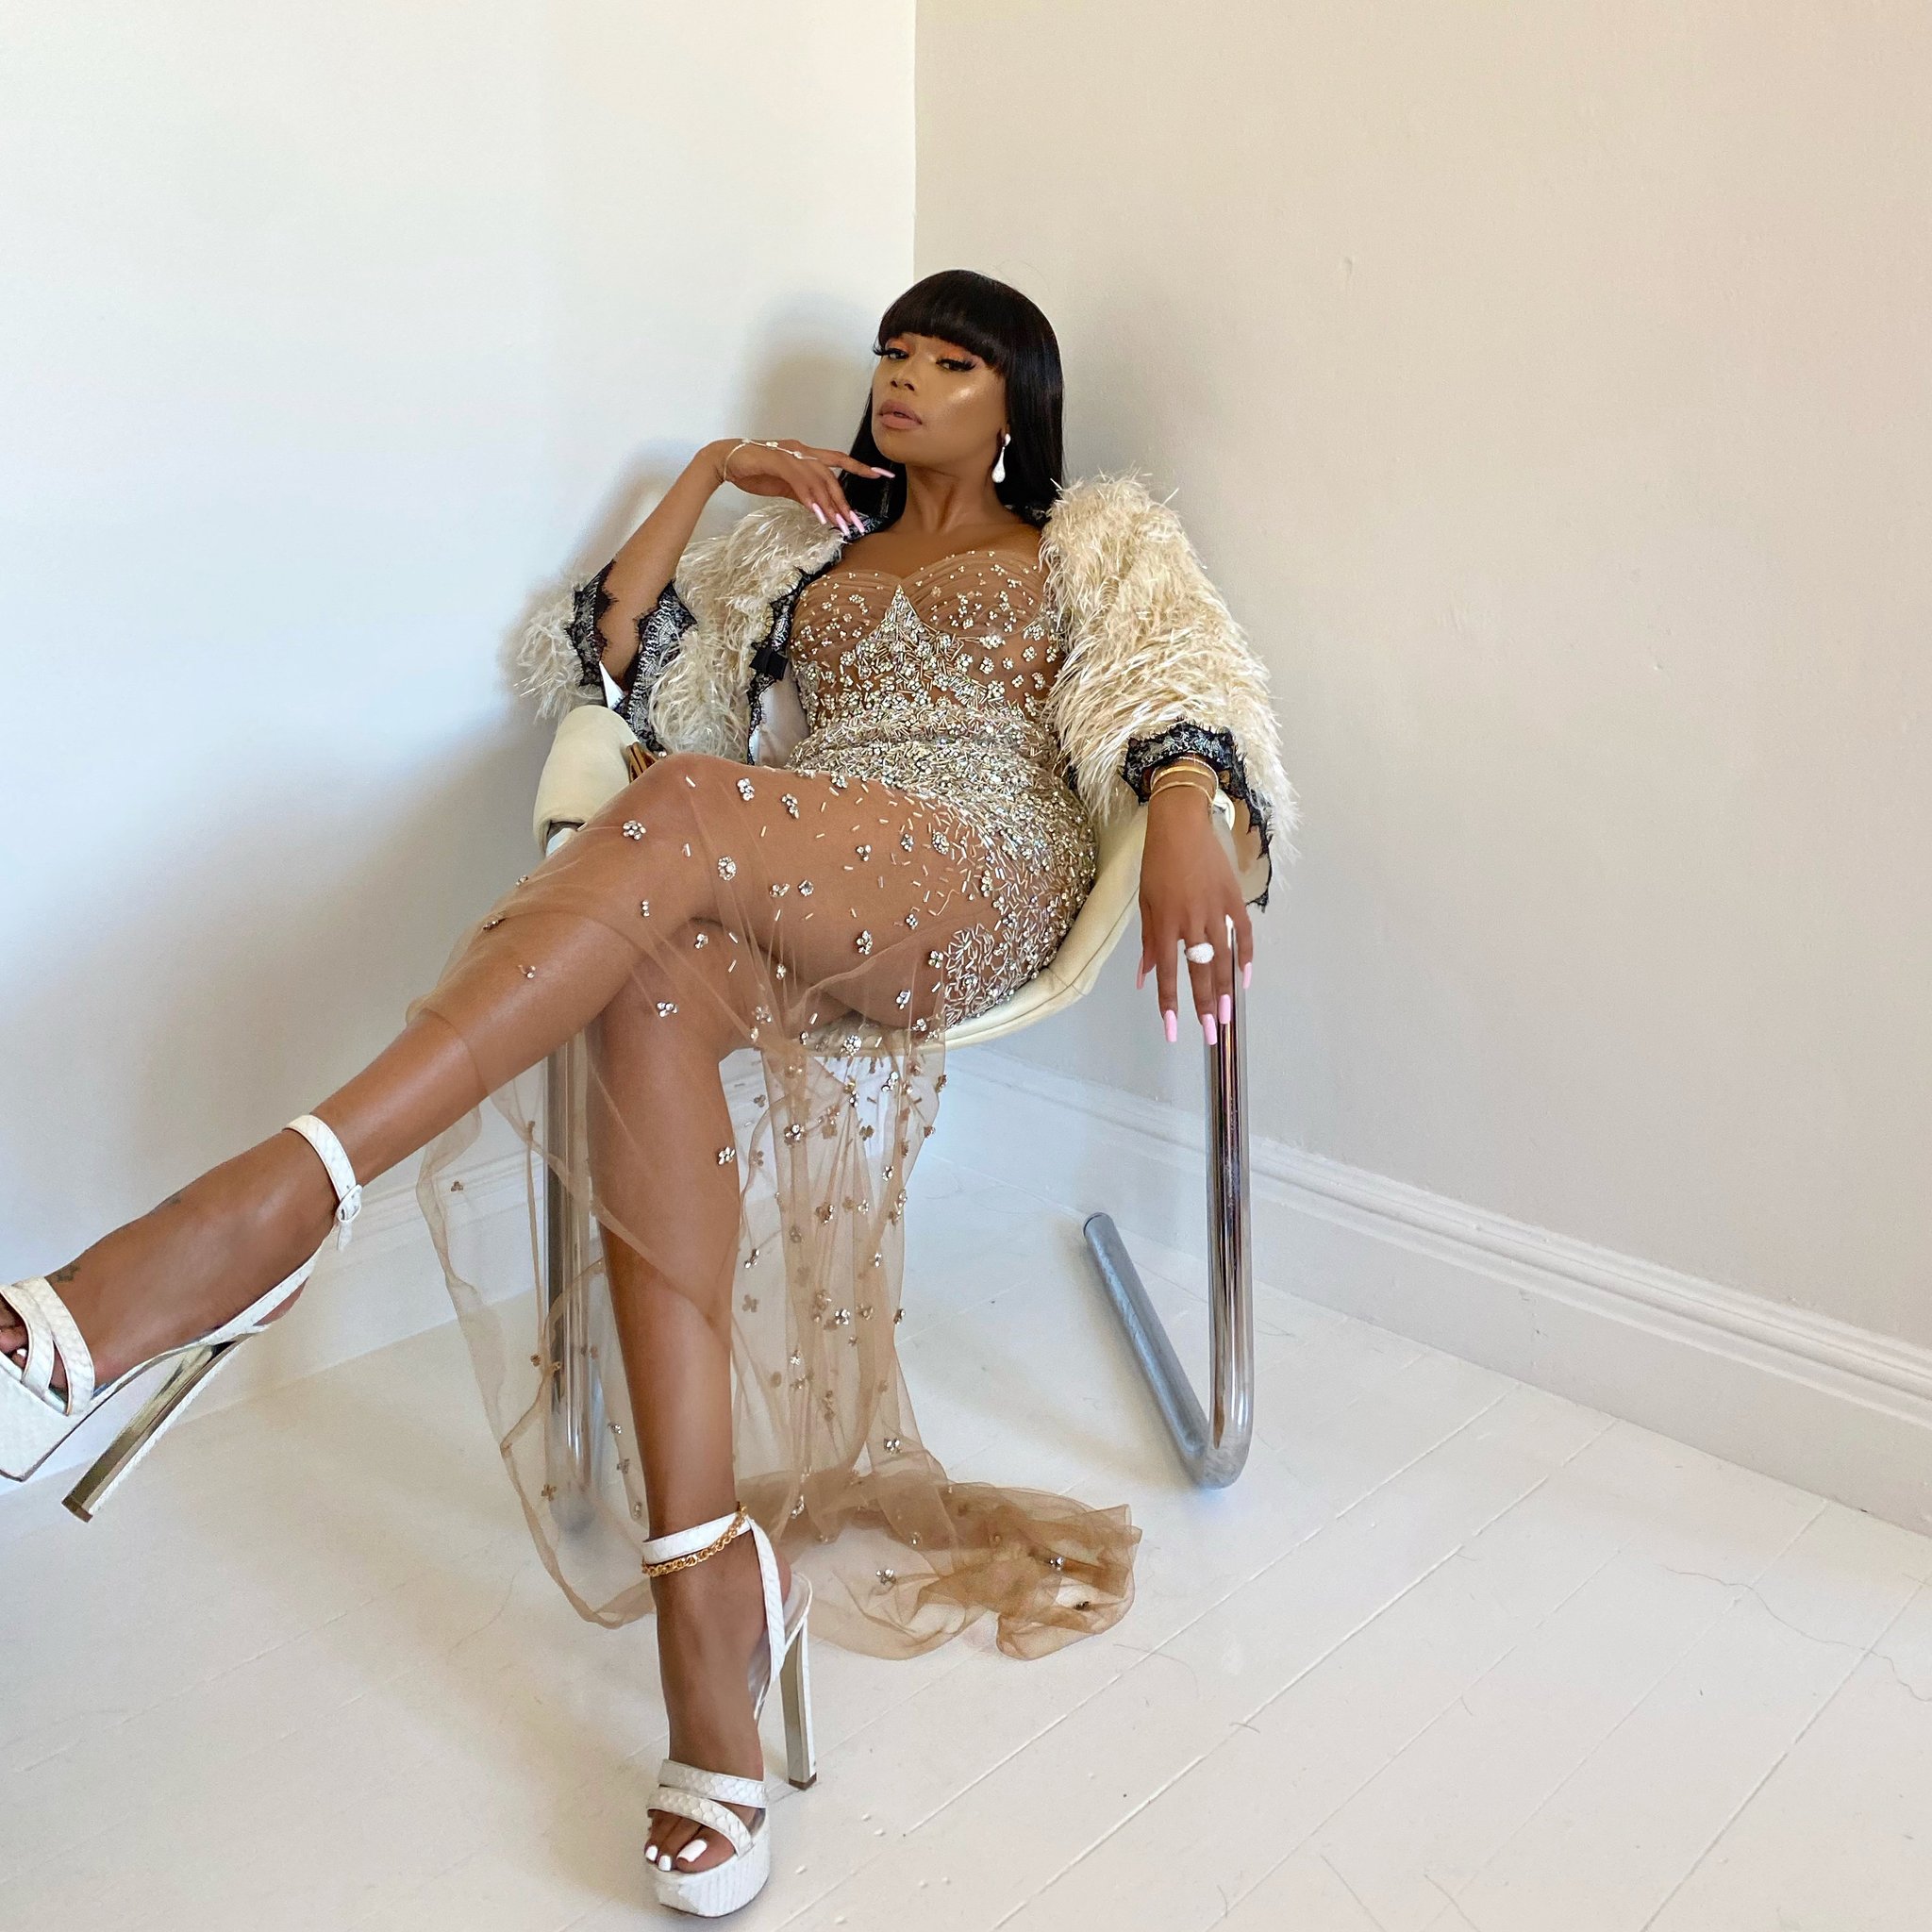 Bonang Matheba, or "Queen B" as she’s known by her fans, was born...